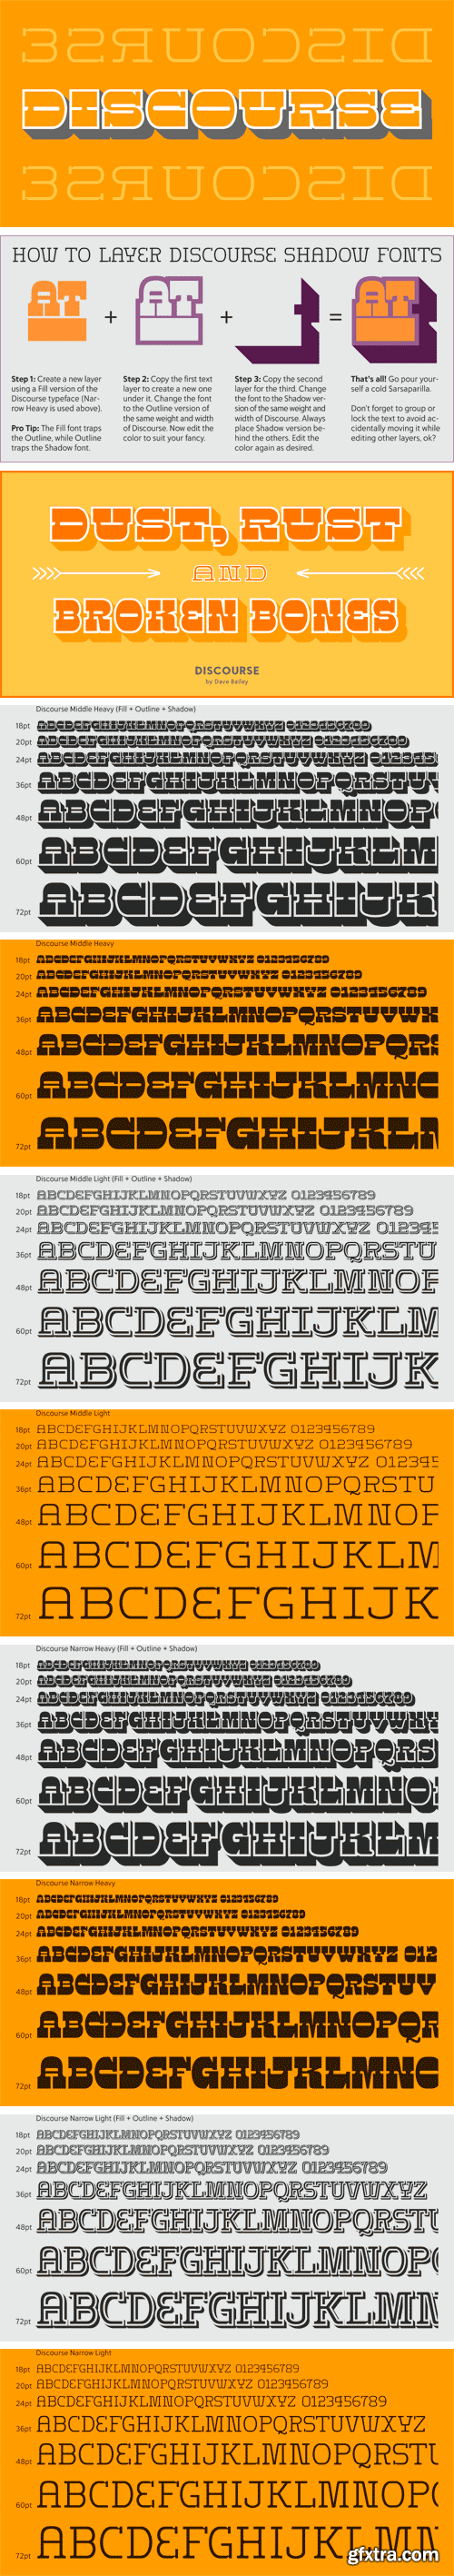 Discourse Font Family